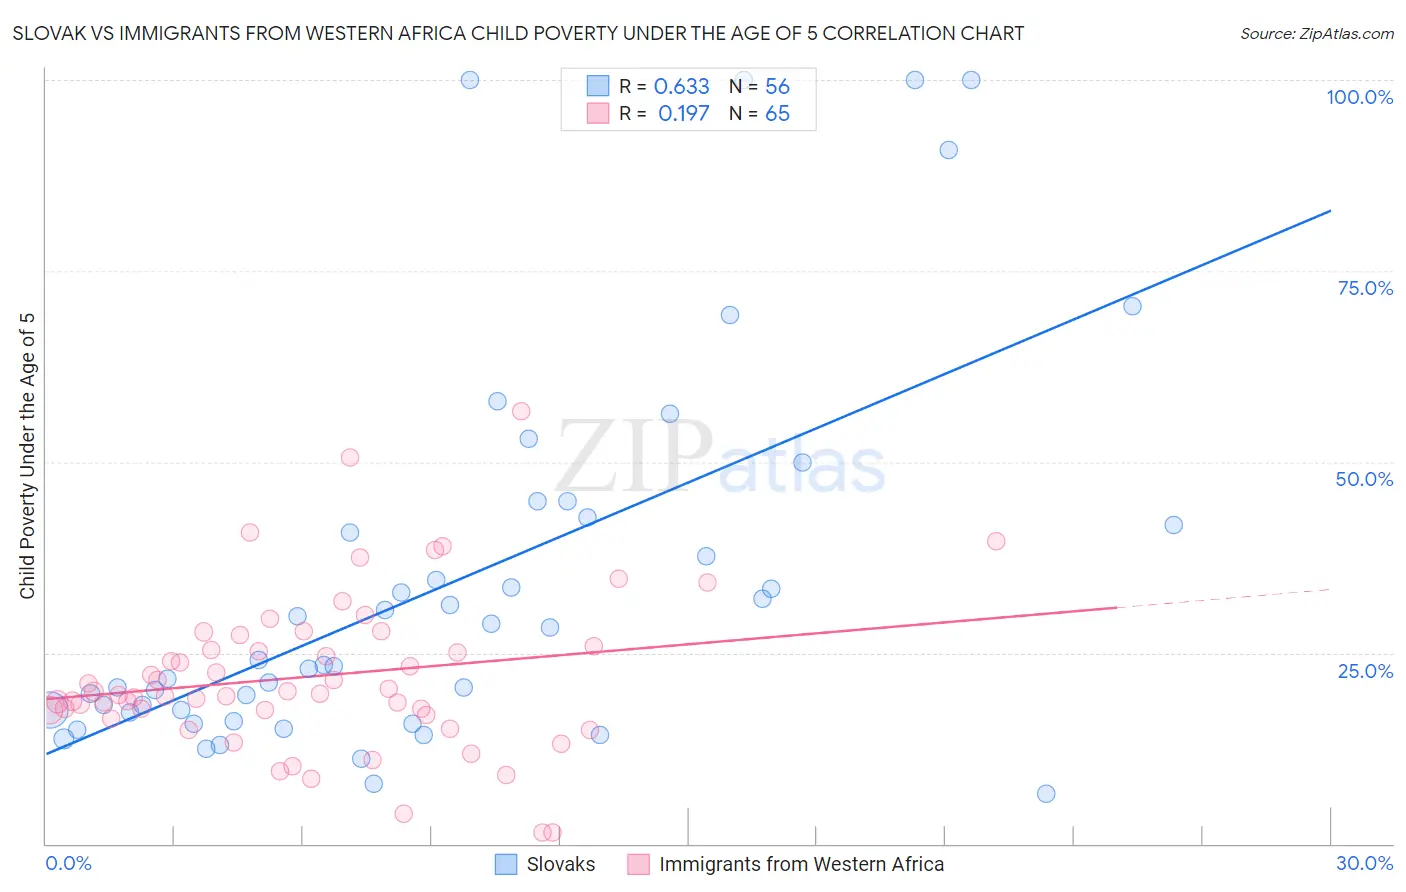 Slovak vs Immigrants from Western Africa Child Poverty Under the Age of 5